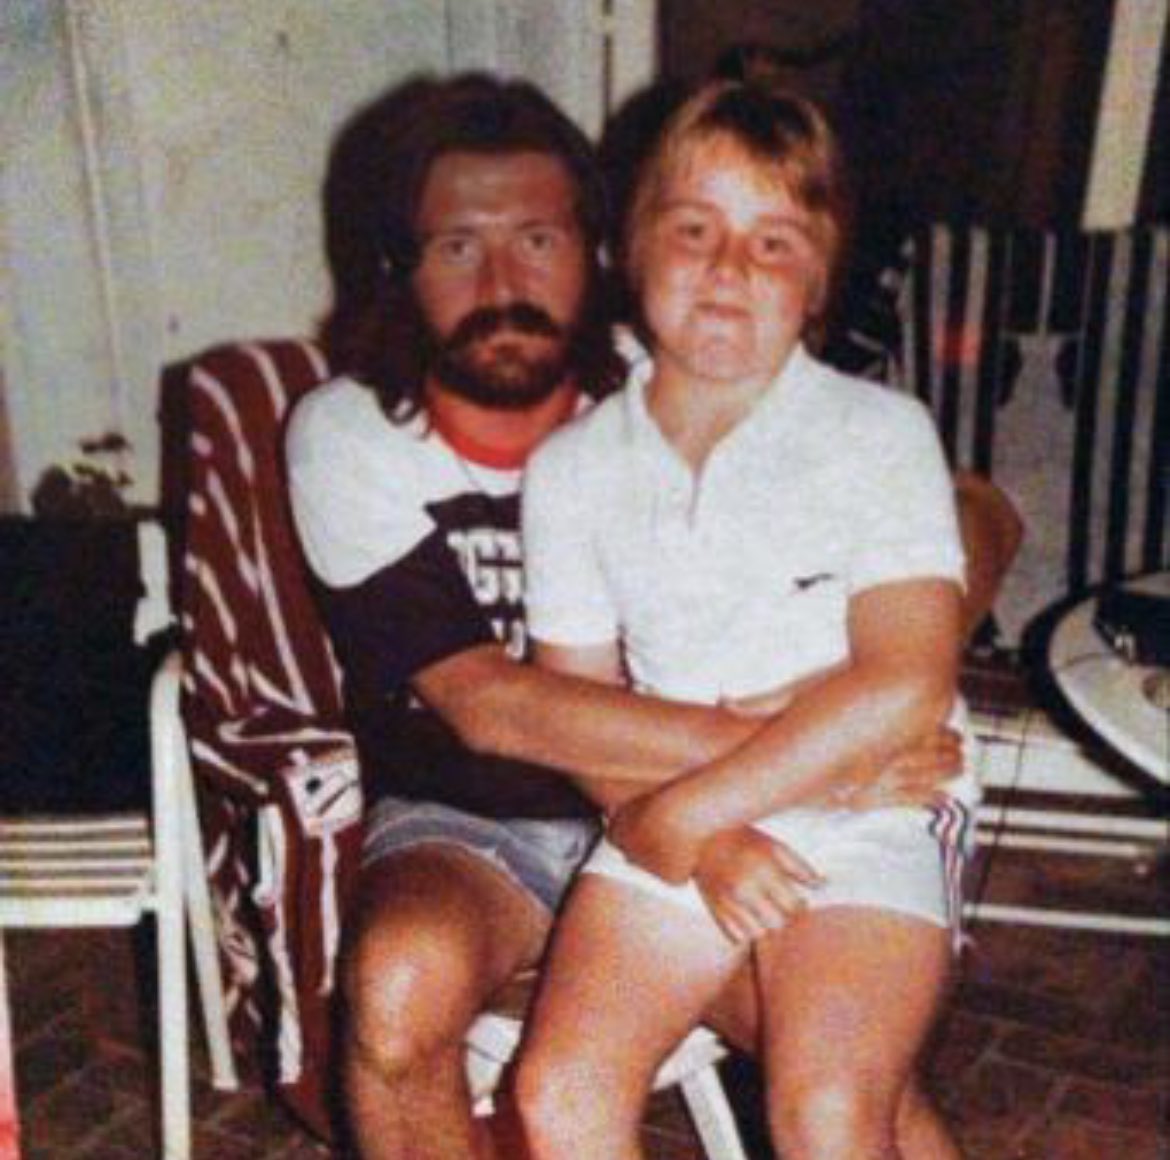 One of the final photos of Led Zeppelin's John Bonham, taken in August 1980 during a holiday with his son. He passed away on September 25th 1980. The inquest disclosed that he had consumed around 40 shots (1-1.4 liters) of 40% ABV vodka within 24 hours, resulting in pulmonary